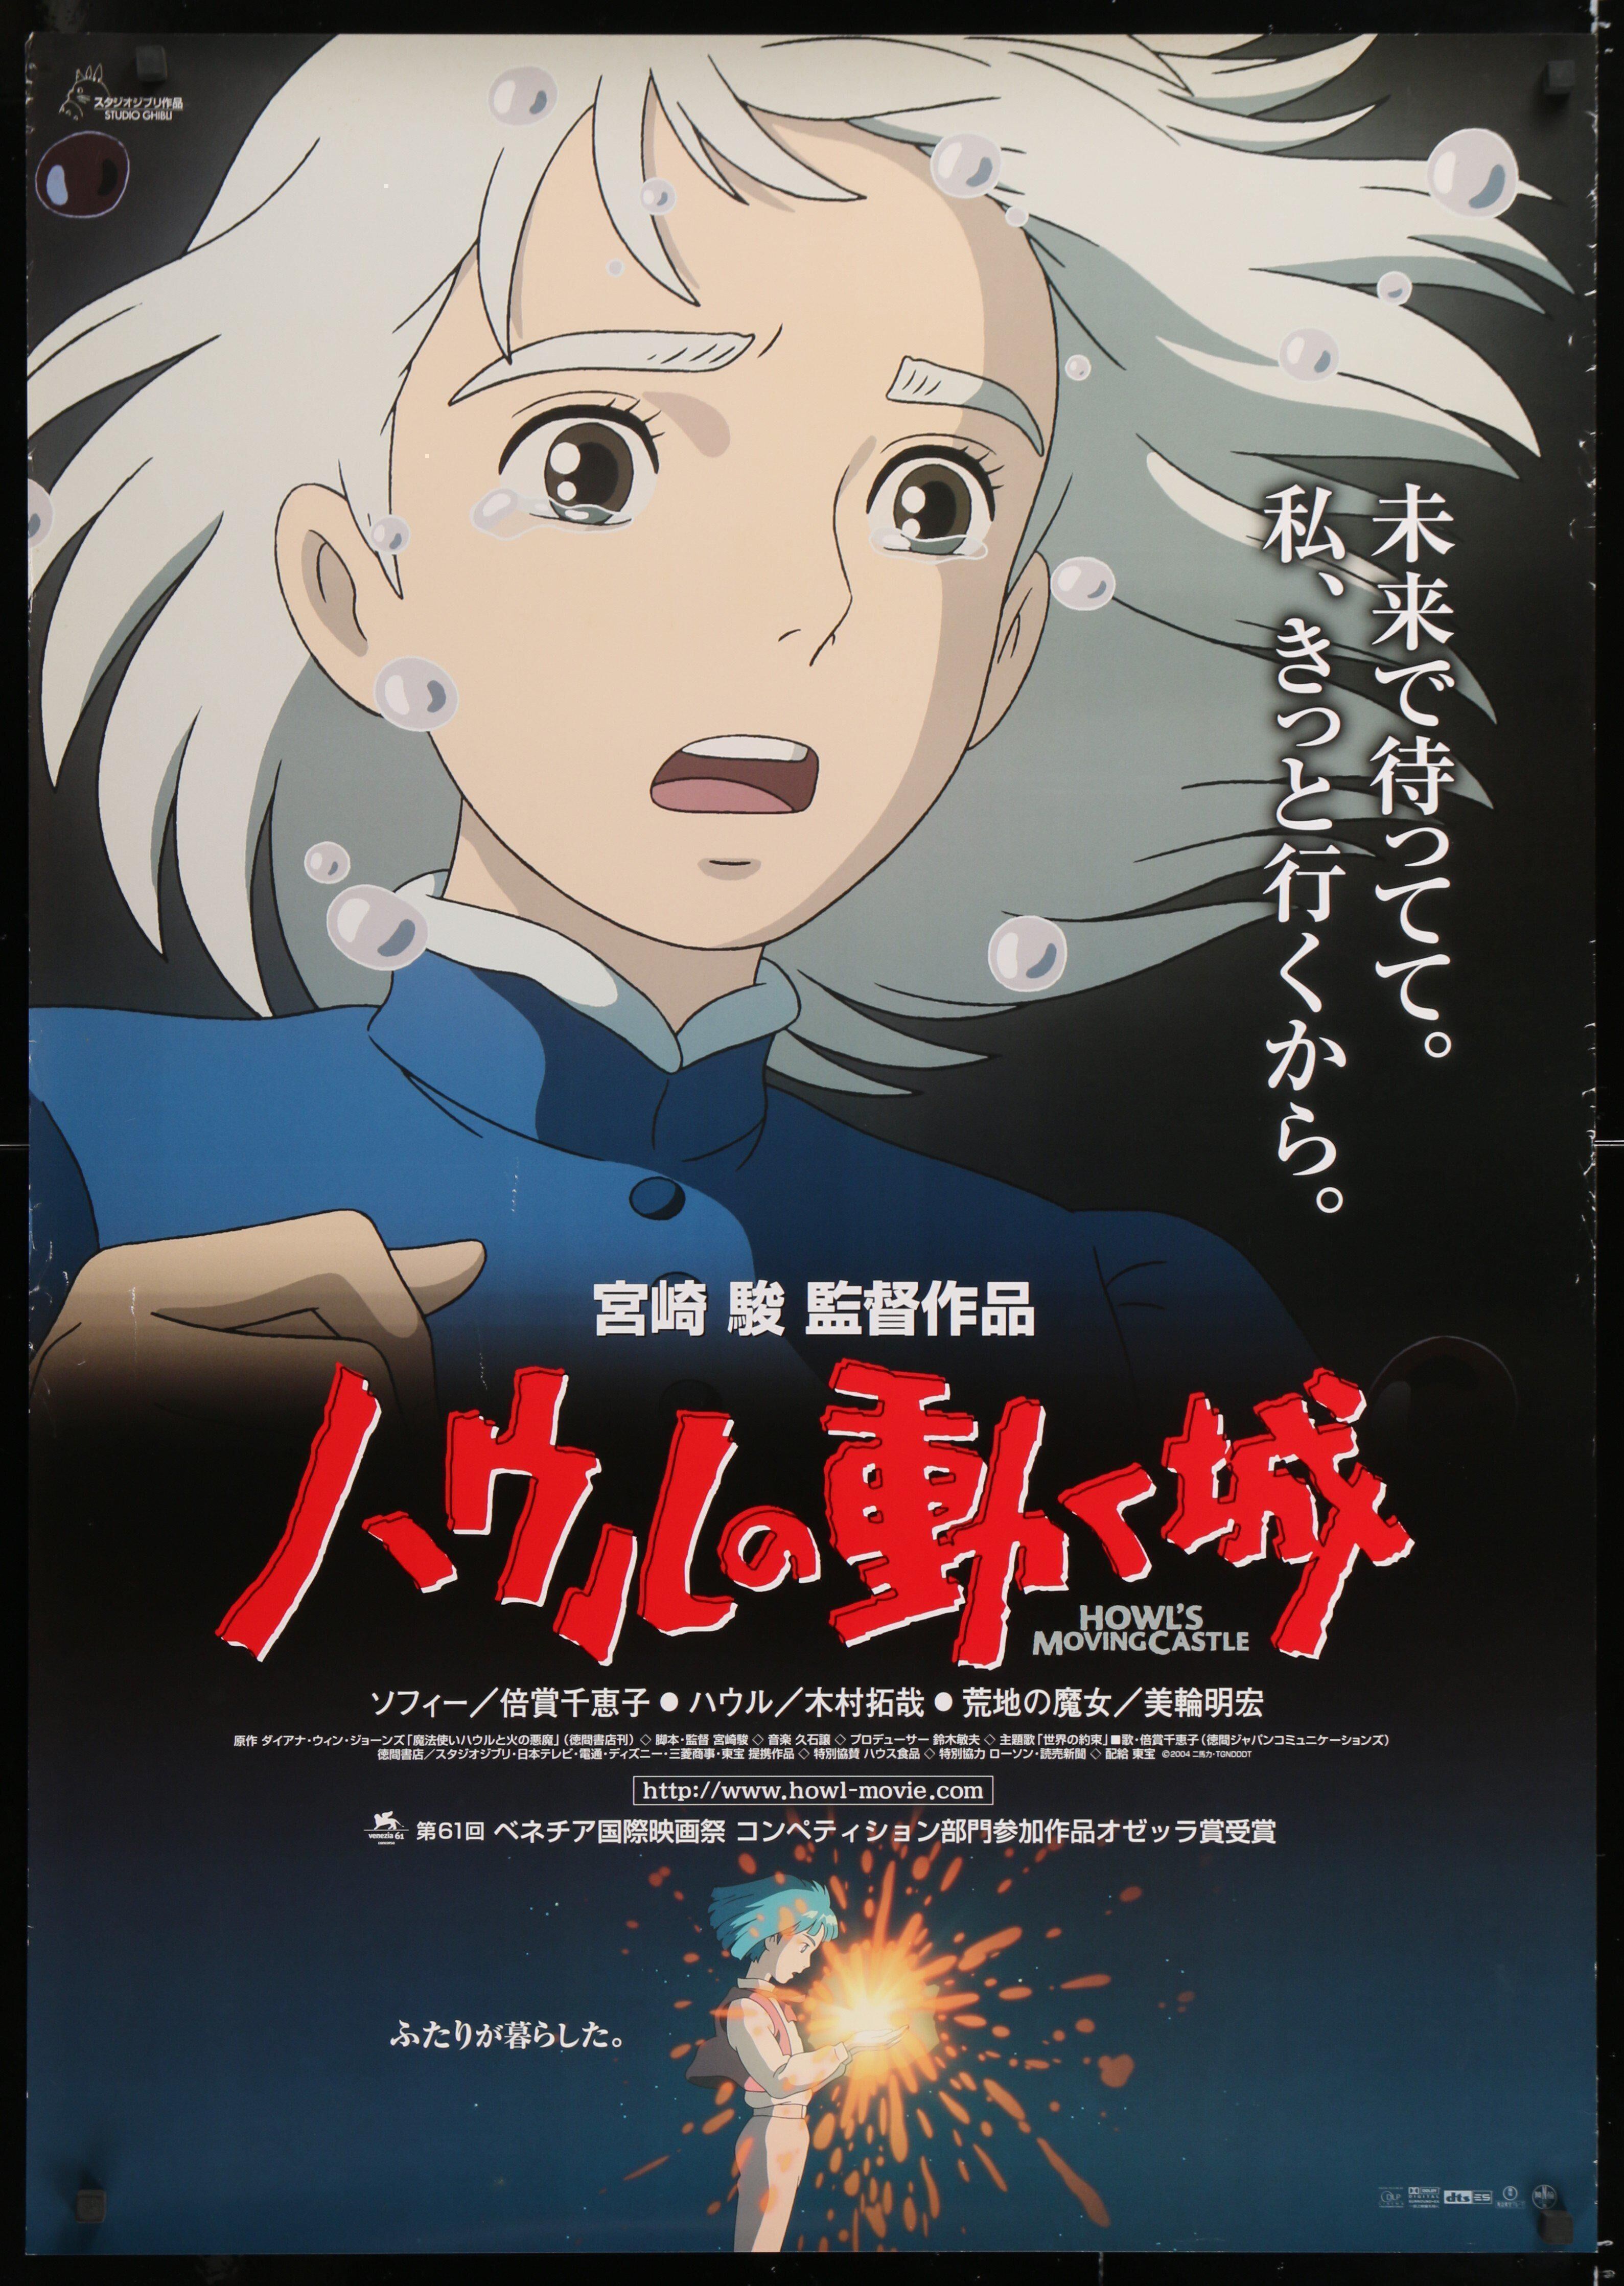 Howl's Moving Castle – Golden Age Cinema and Bar